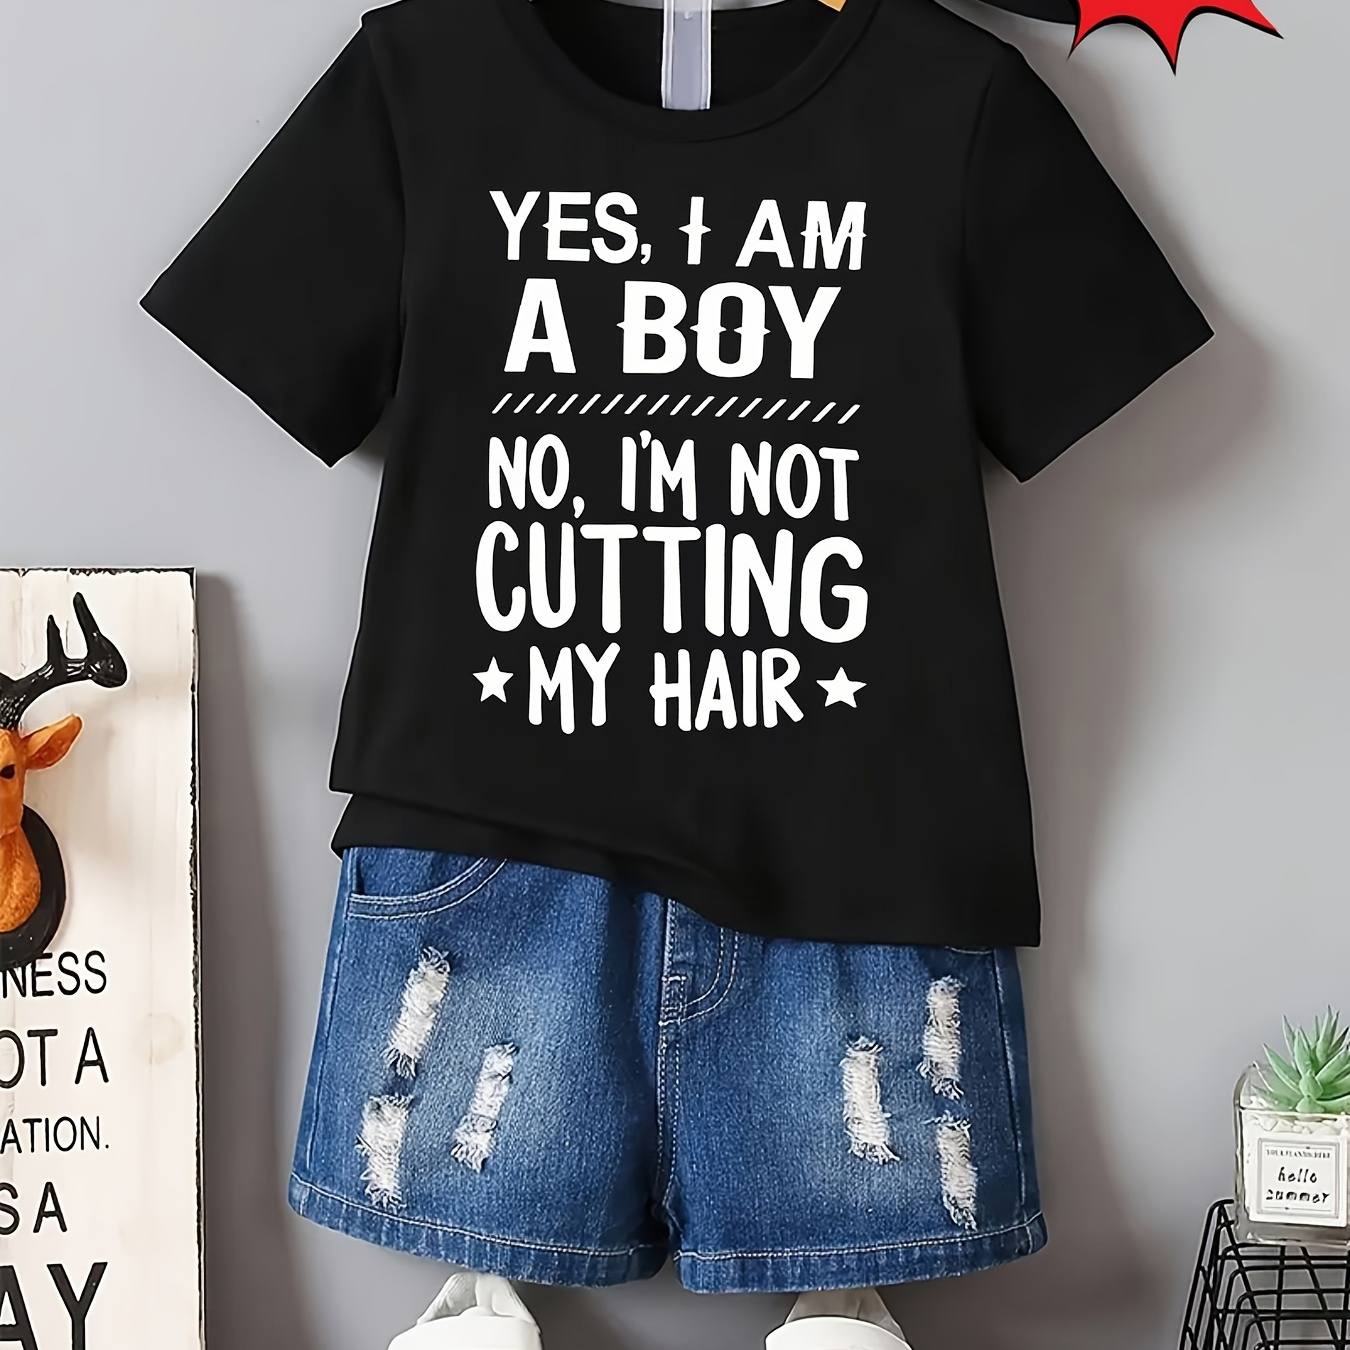 

Milkyship Summer Fashion T-shirt With Yes, I Am A Boy... Letter Print For Boys - Cute And Casual Short Sleeve Top